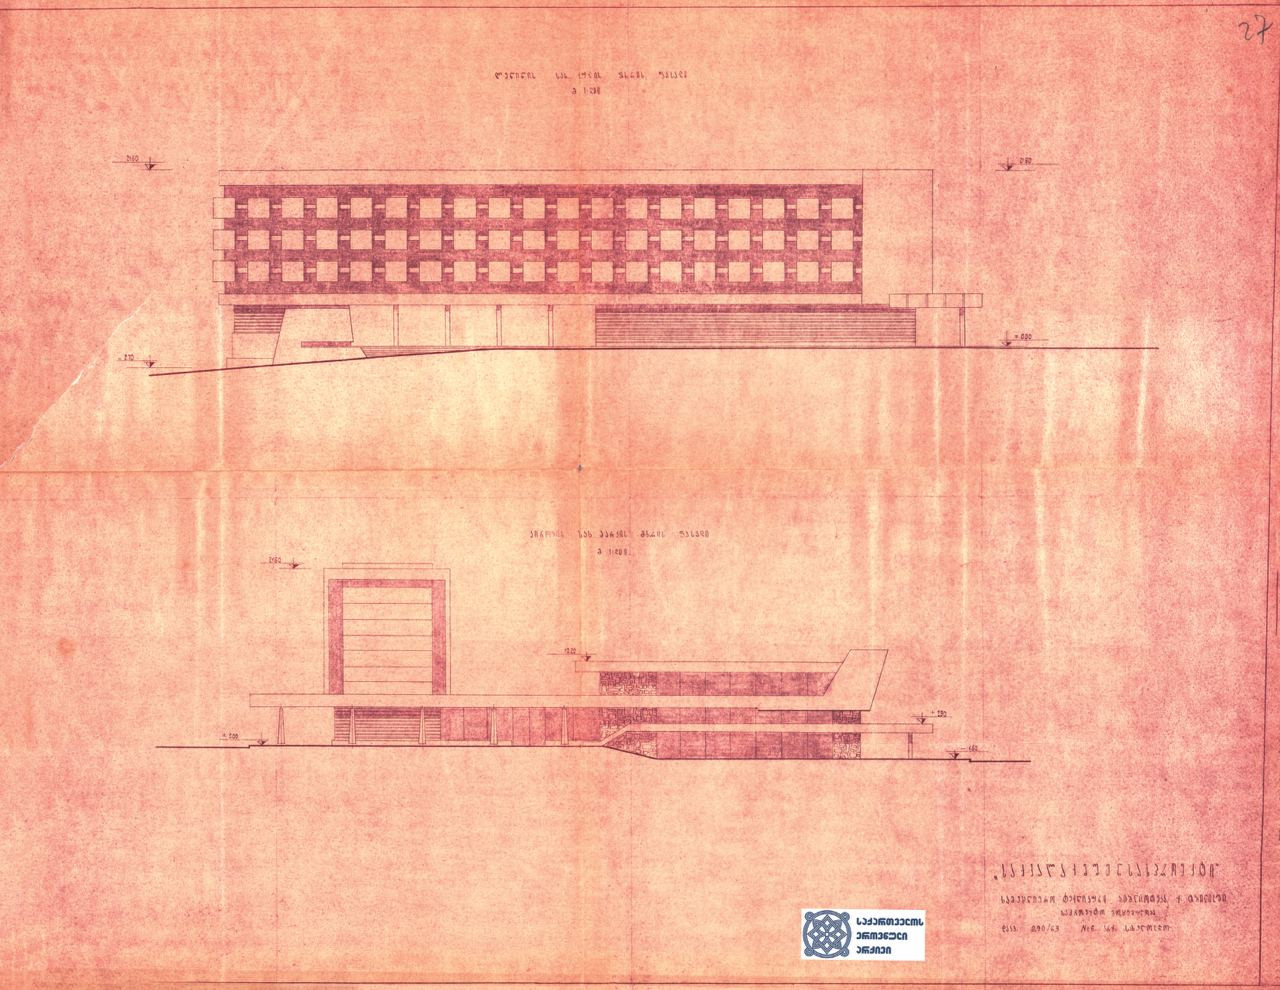 SCIENTIFIC-TECHNICAL LIBRARY NAMED AFTER GIVI MIKELADZE Architect: Gari Bichiashvili, 1986 Drawing and plans from the National Scientific Library of Georgia Photos from Gari Bichiashvili’s private archive